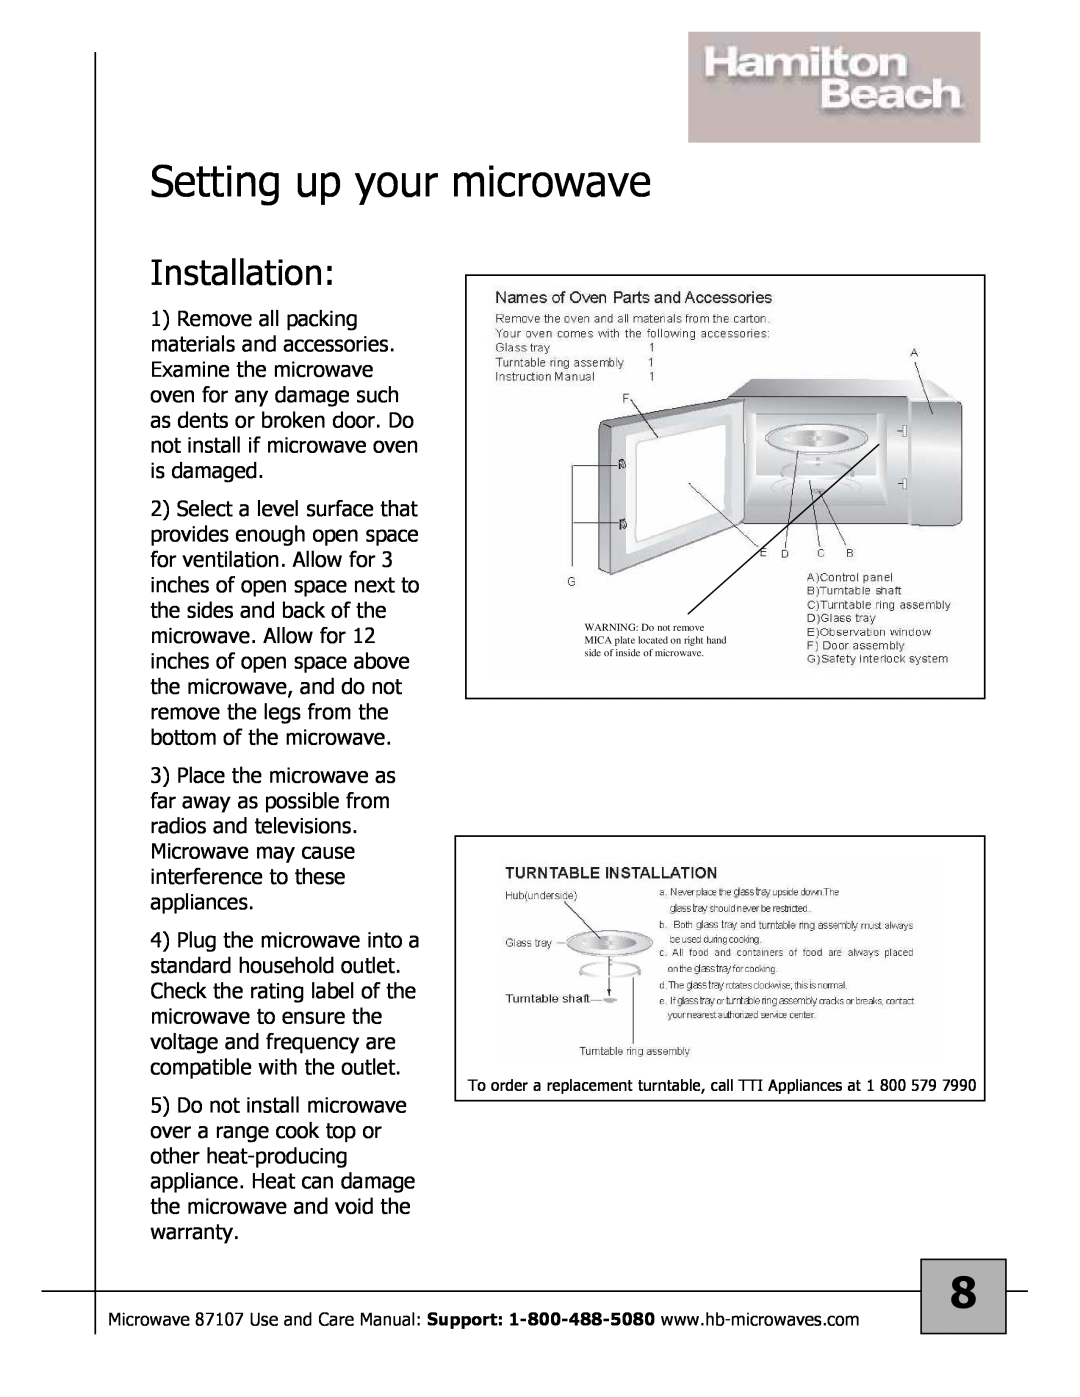 Hamilton Beach 87107 owner manual Setting up your microwave, Installation 